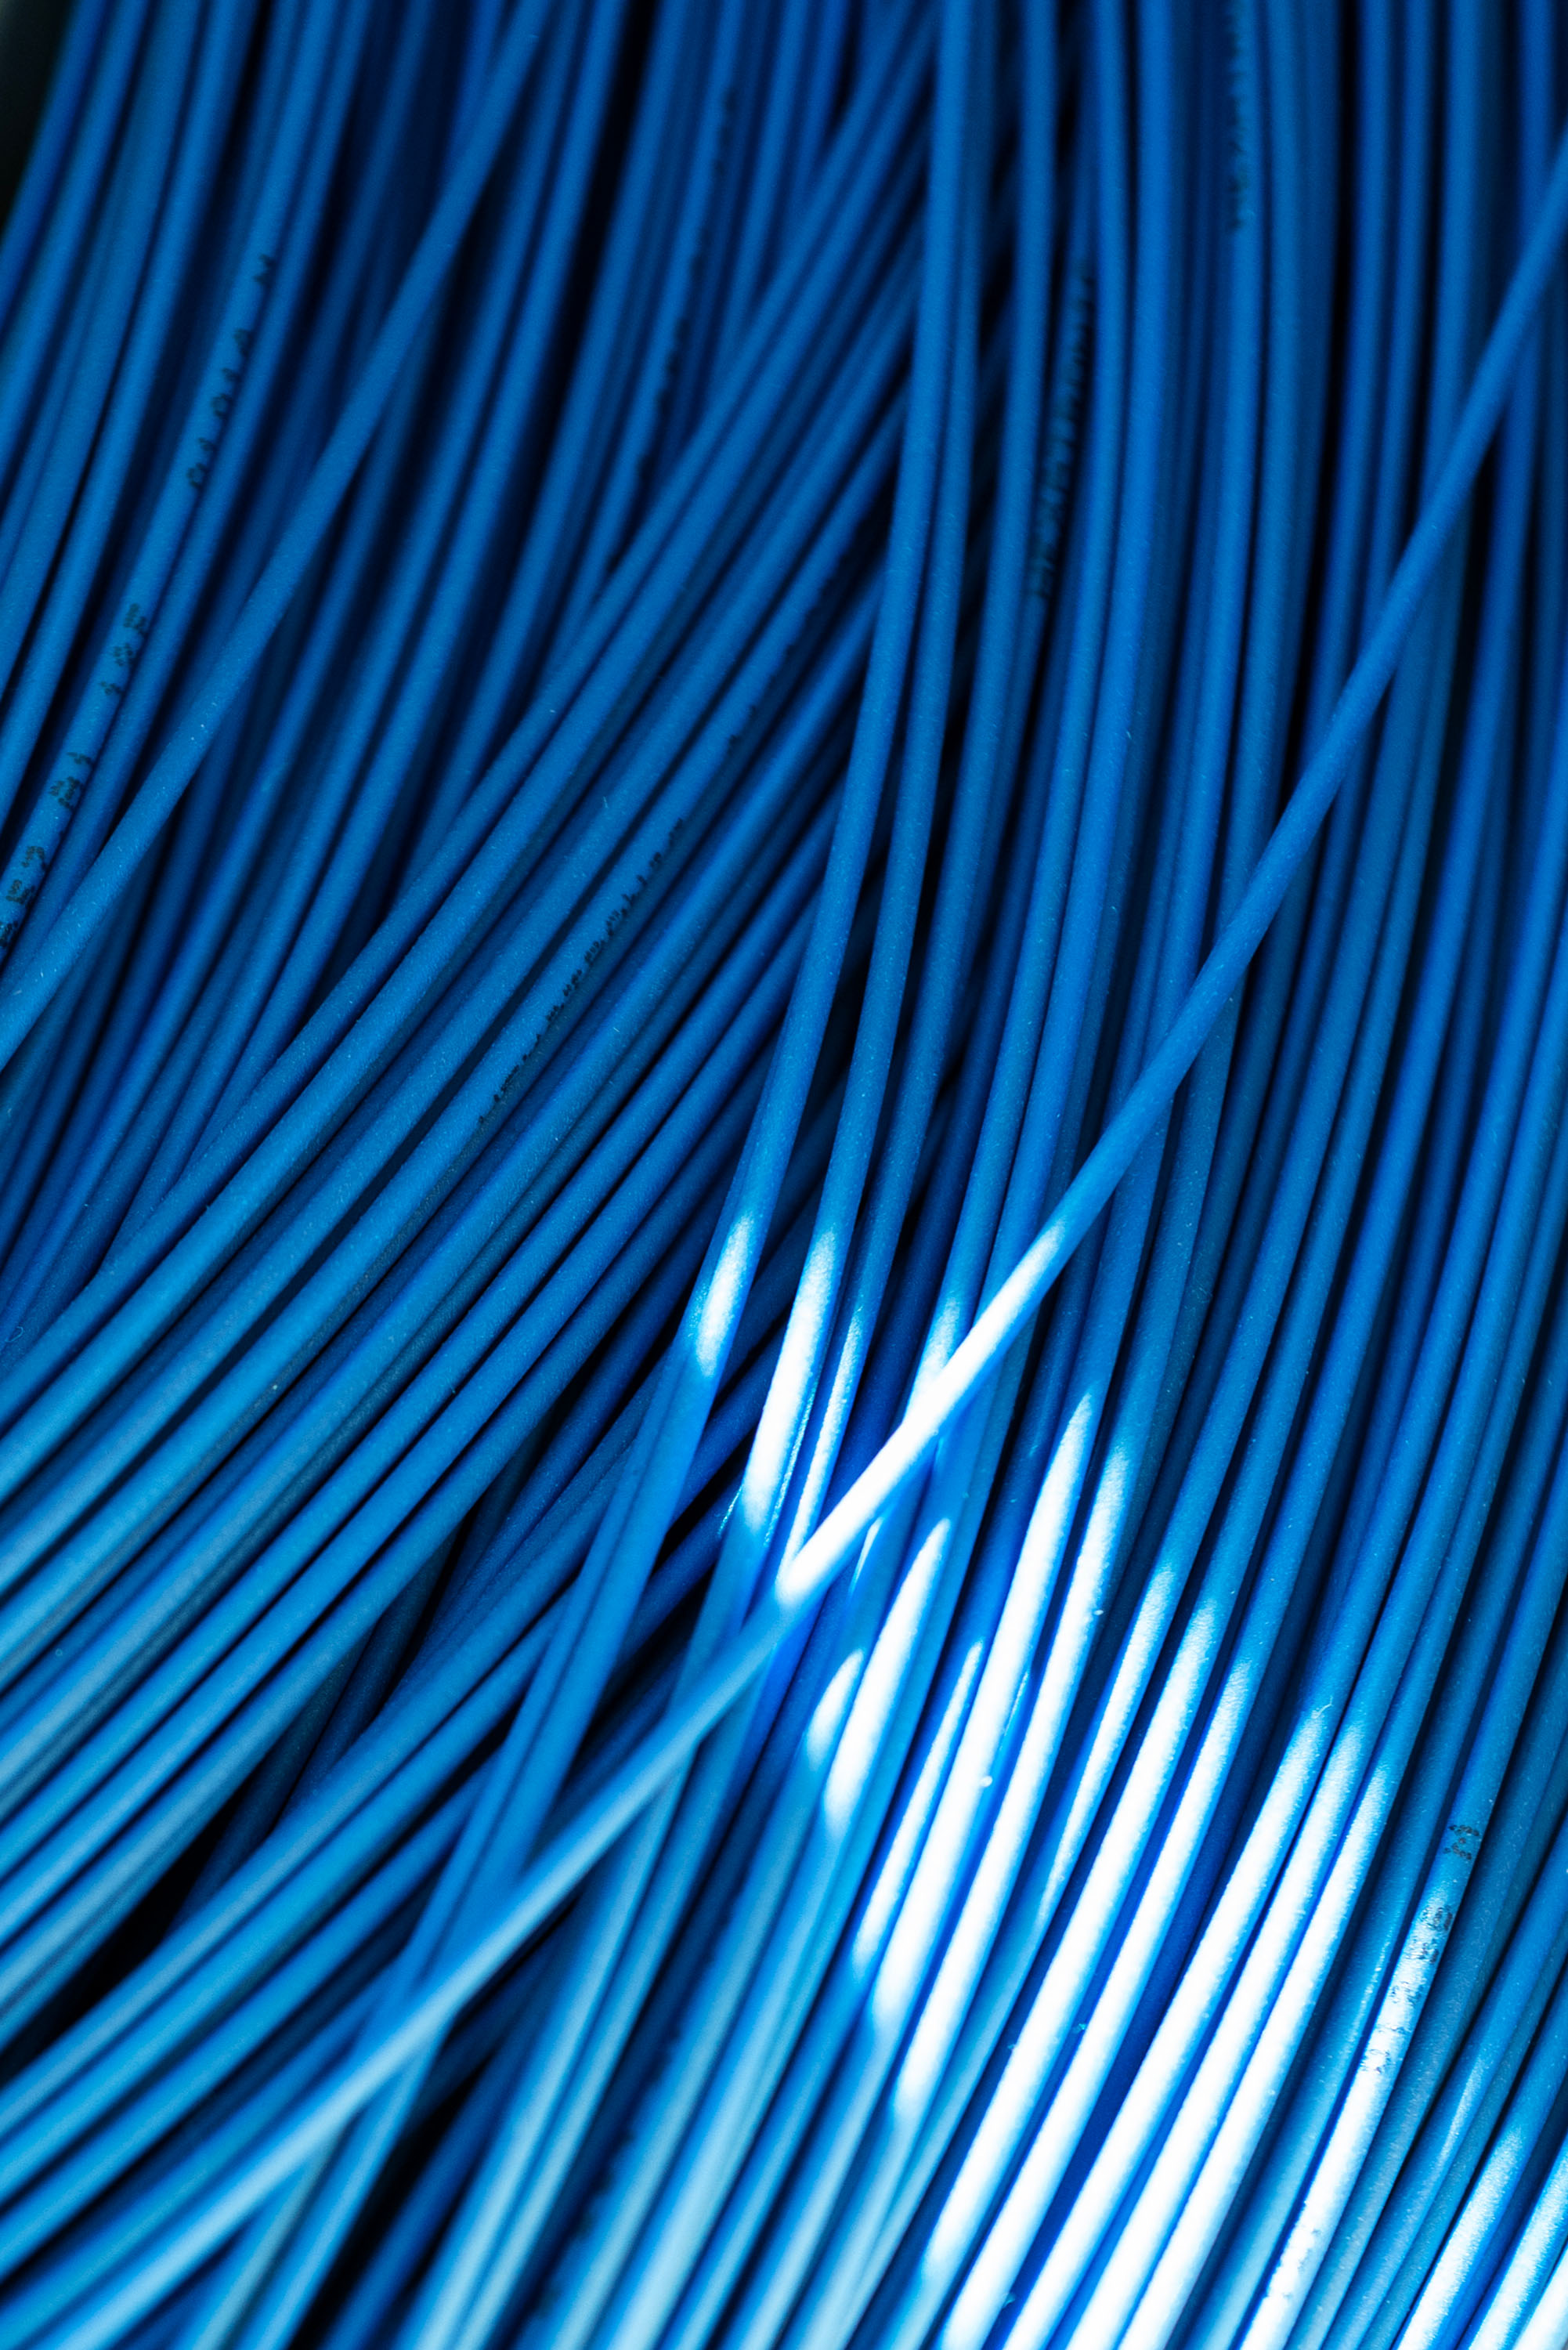 A close-up of a tightly packed bundle of vibrant blue fiber cables reflecting light. No background is visible.